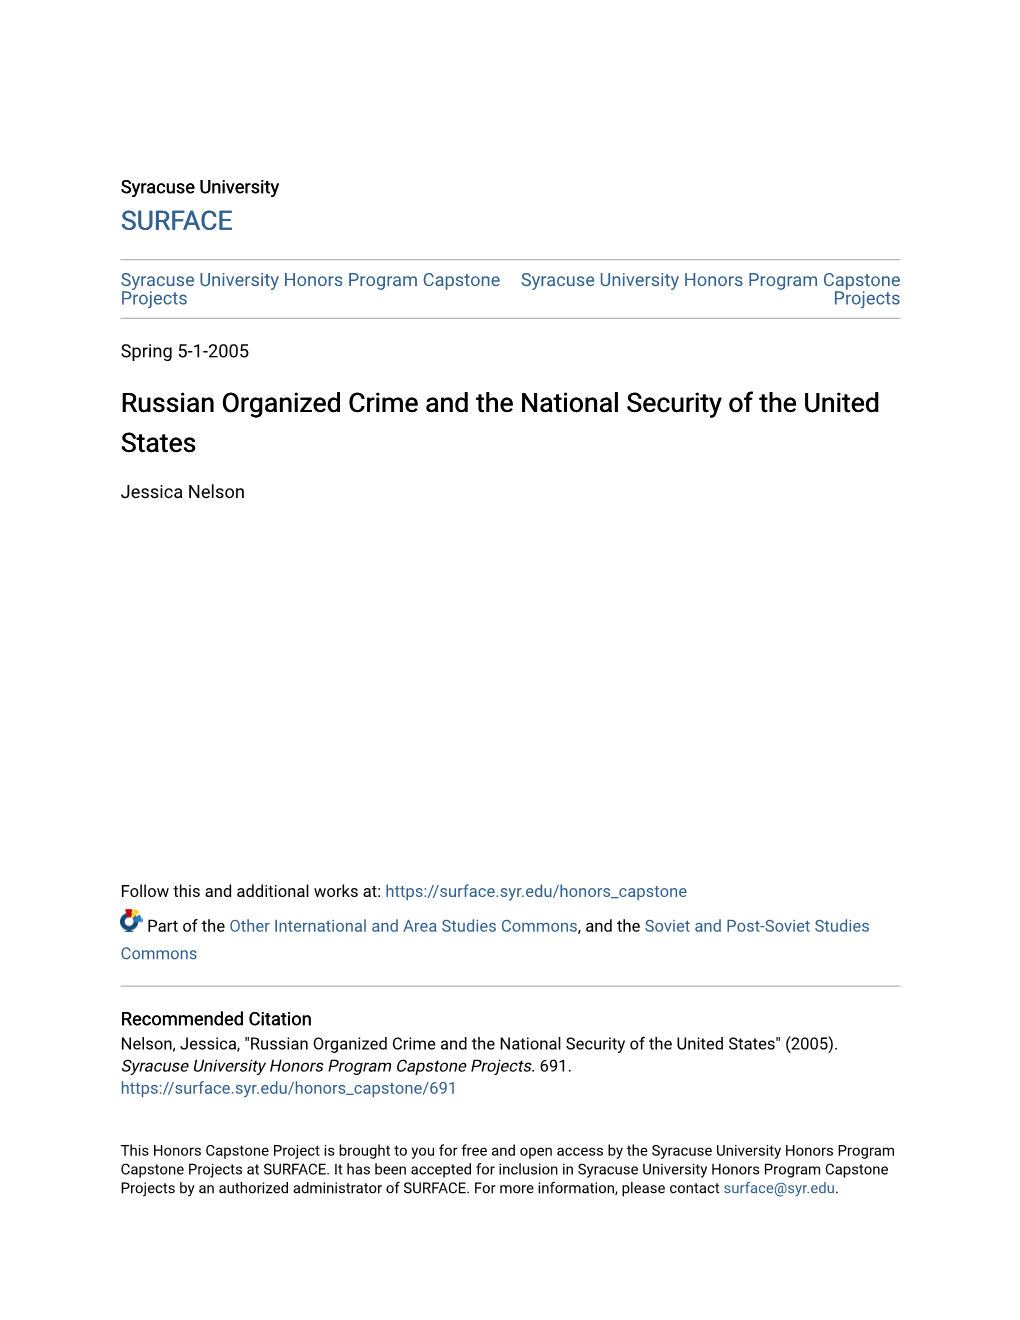 Russian Organized Crime and the National Security of the United States